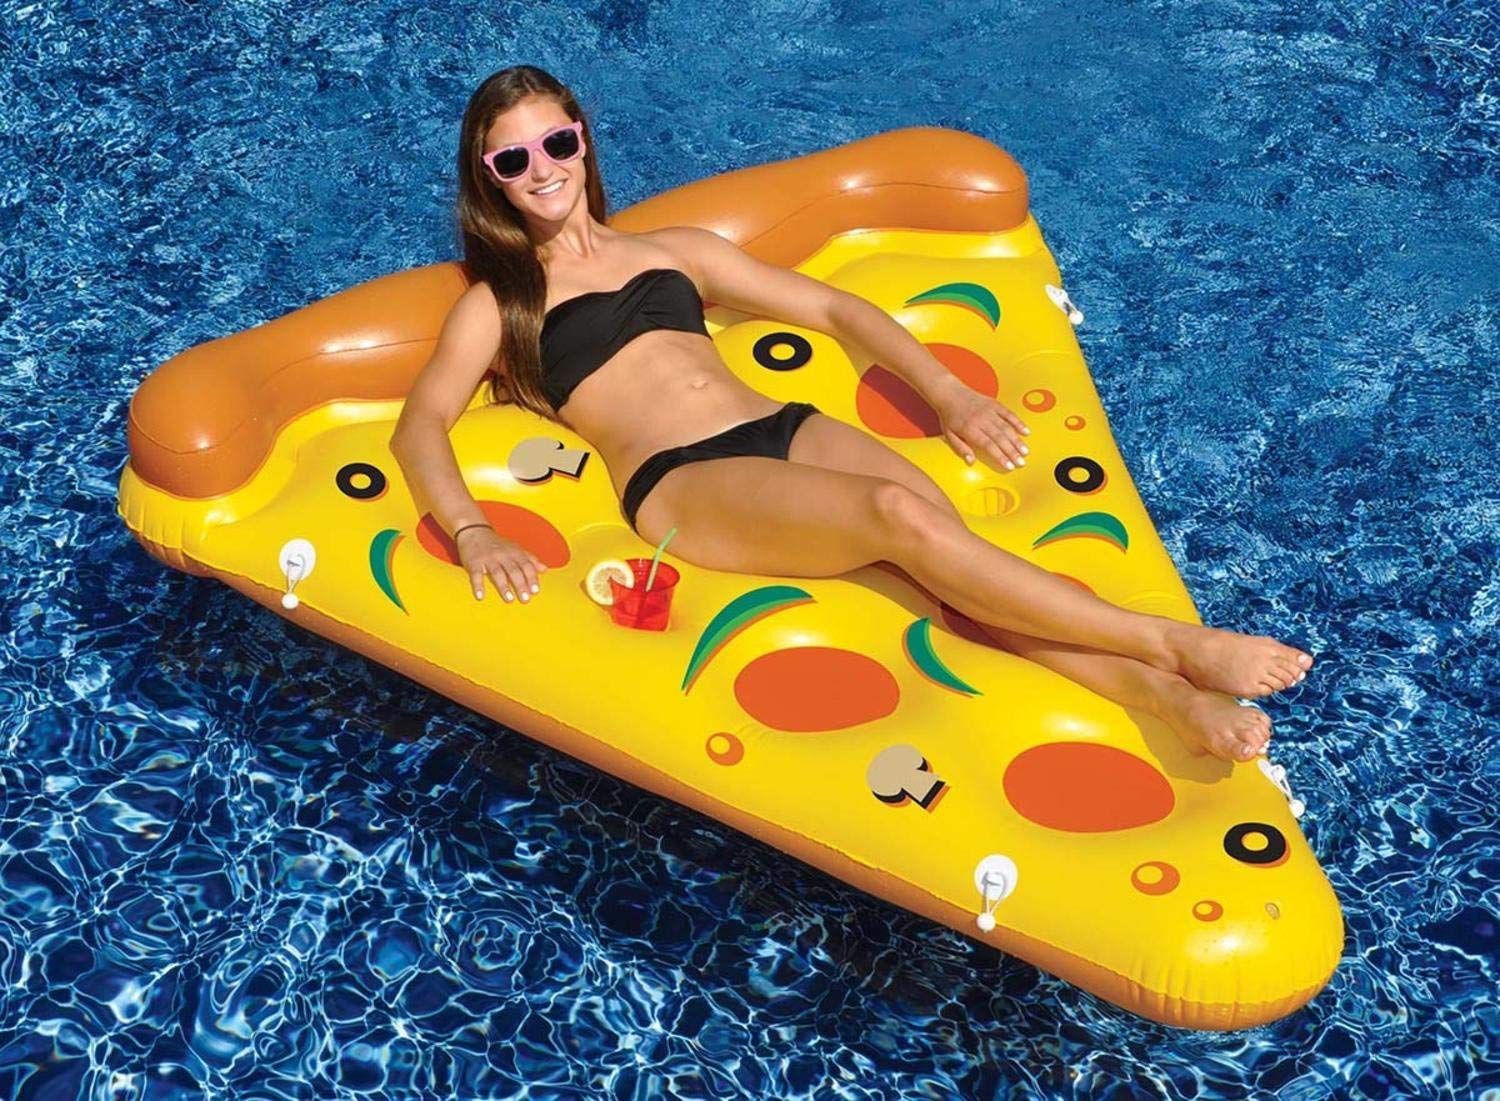 25 Best Pool Floats For Adults 2021 - Cool Swimming Pool Inflatables